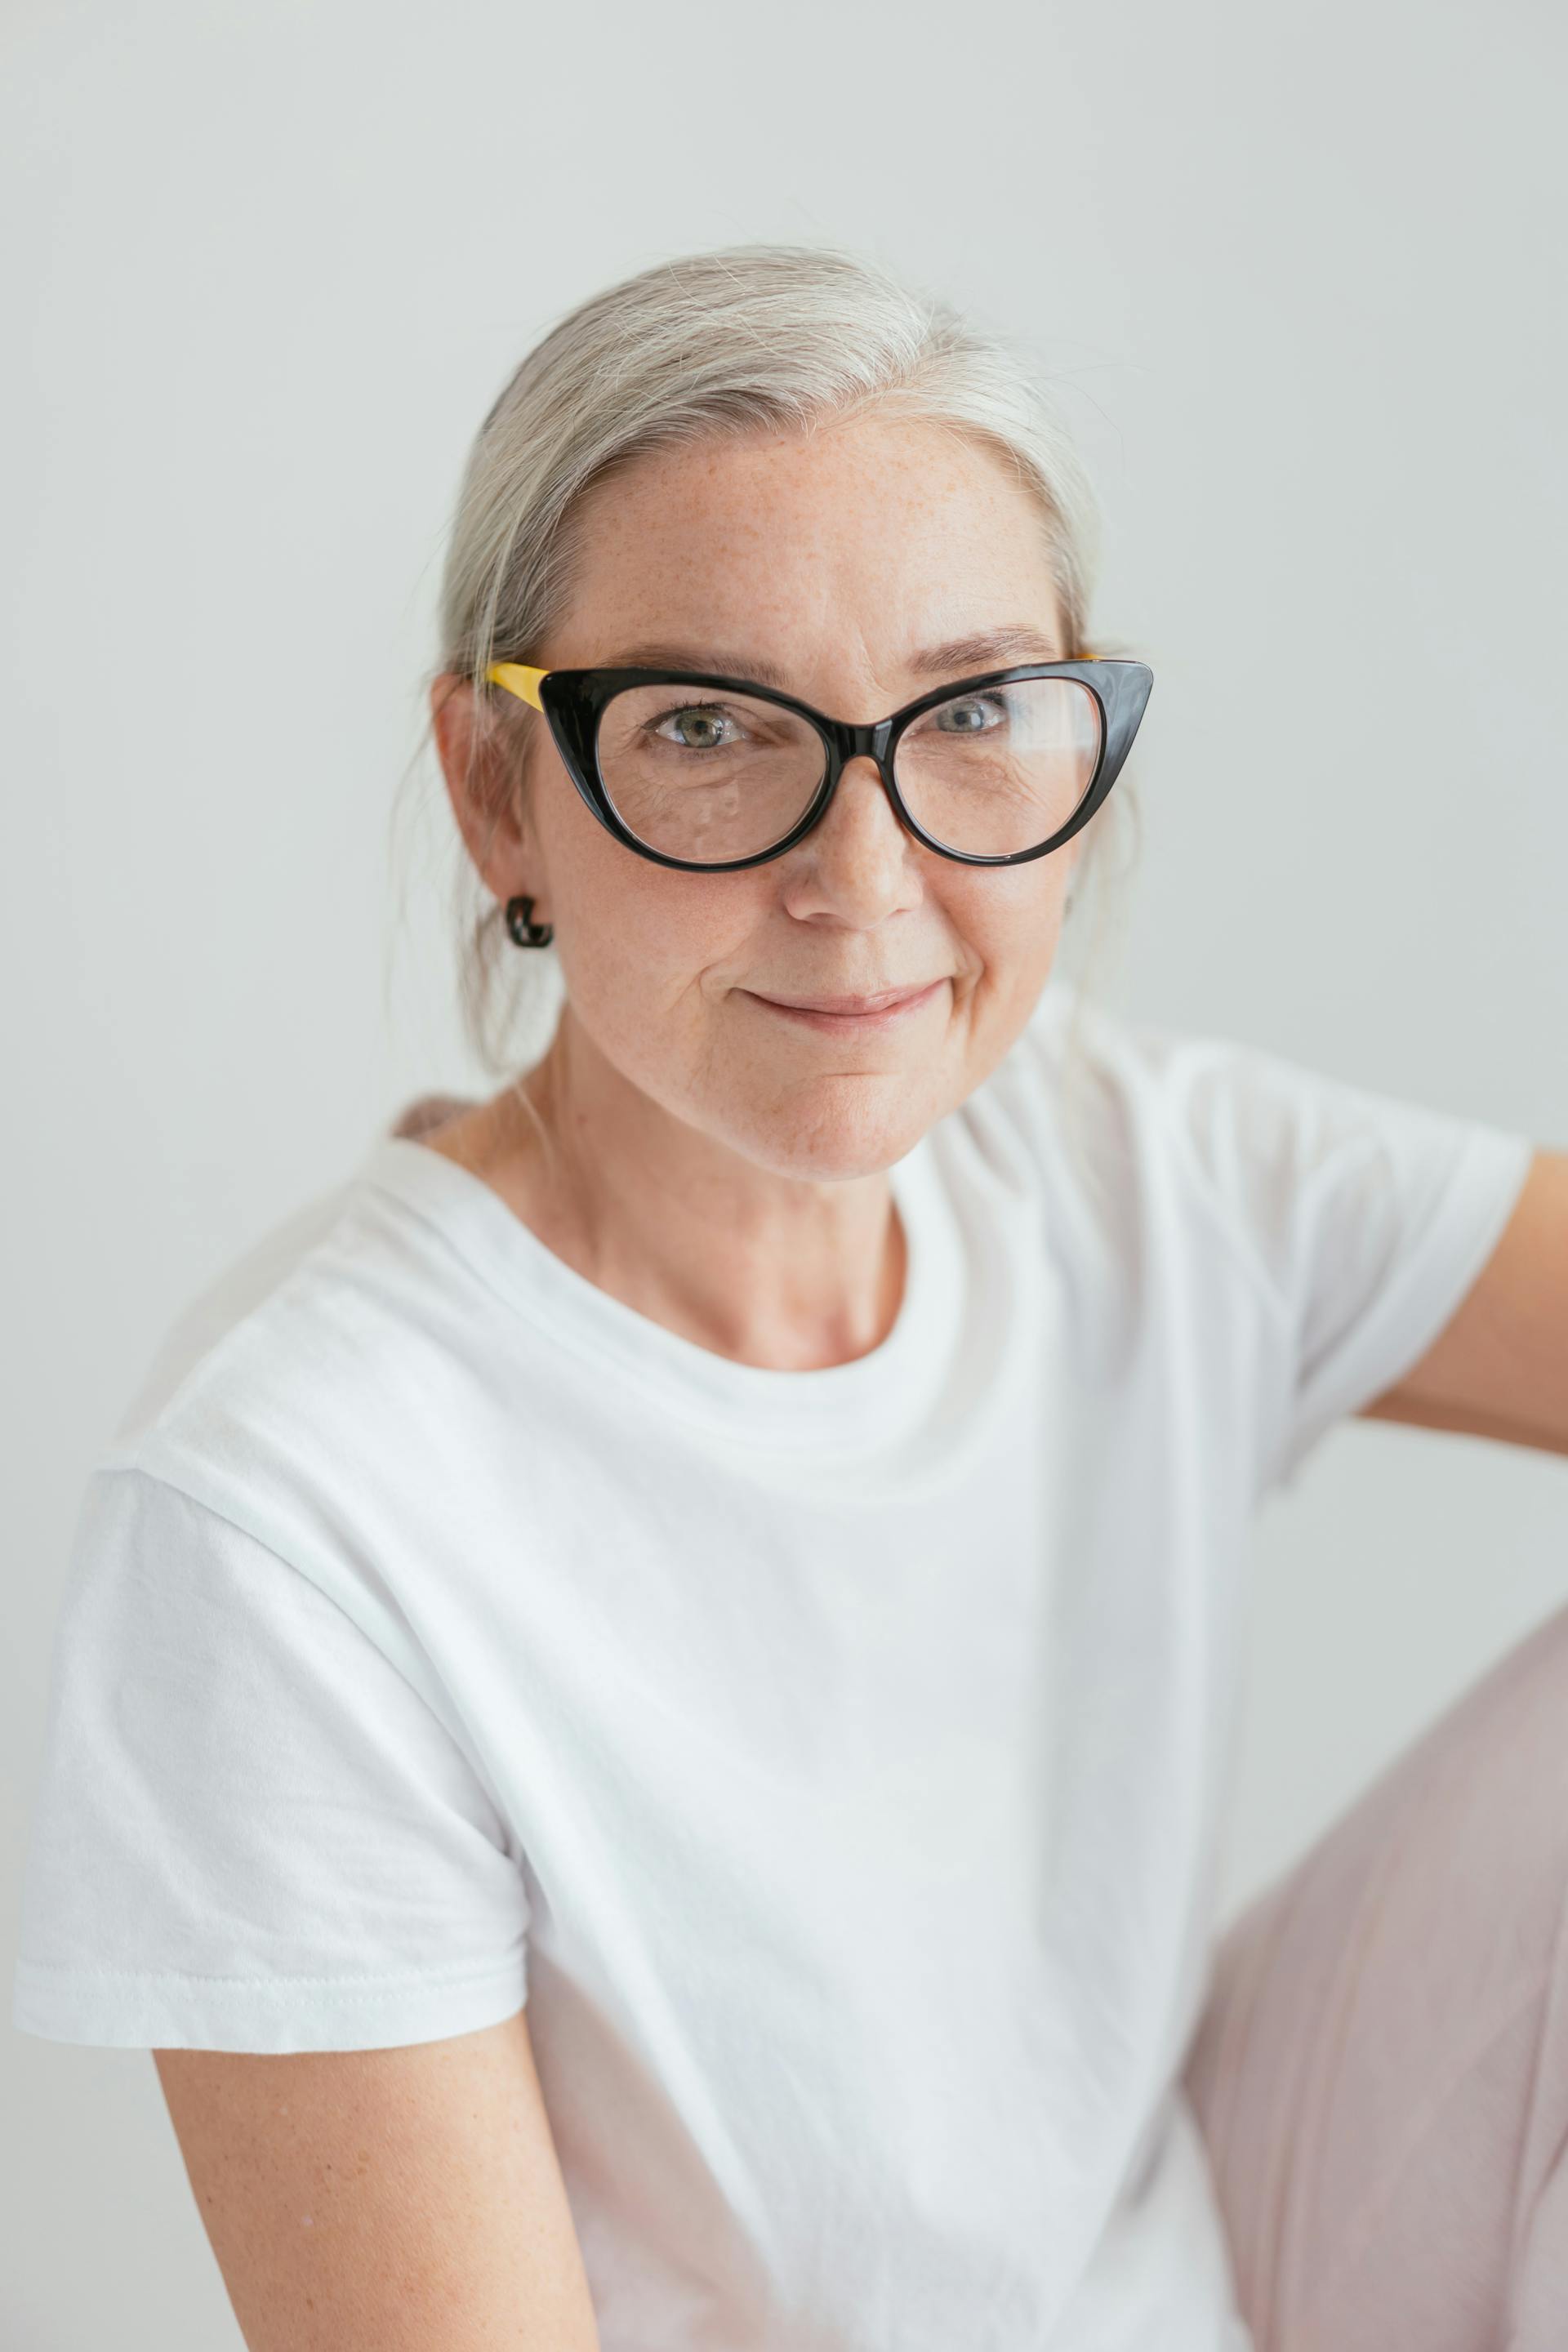 A smiling older woman wearing glasses | Source: Pexels